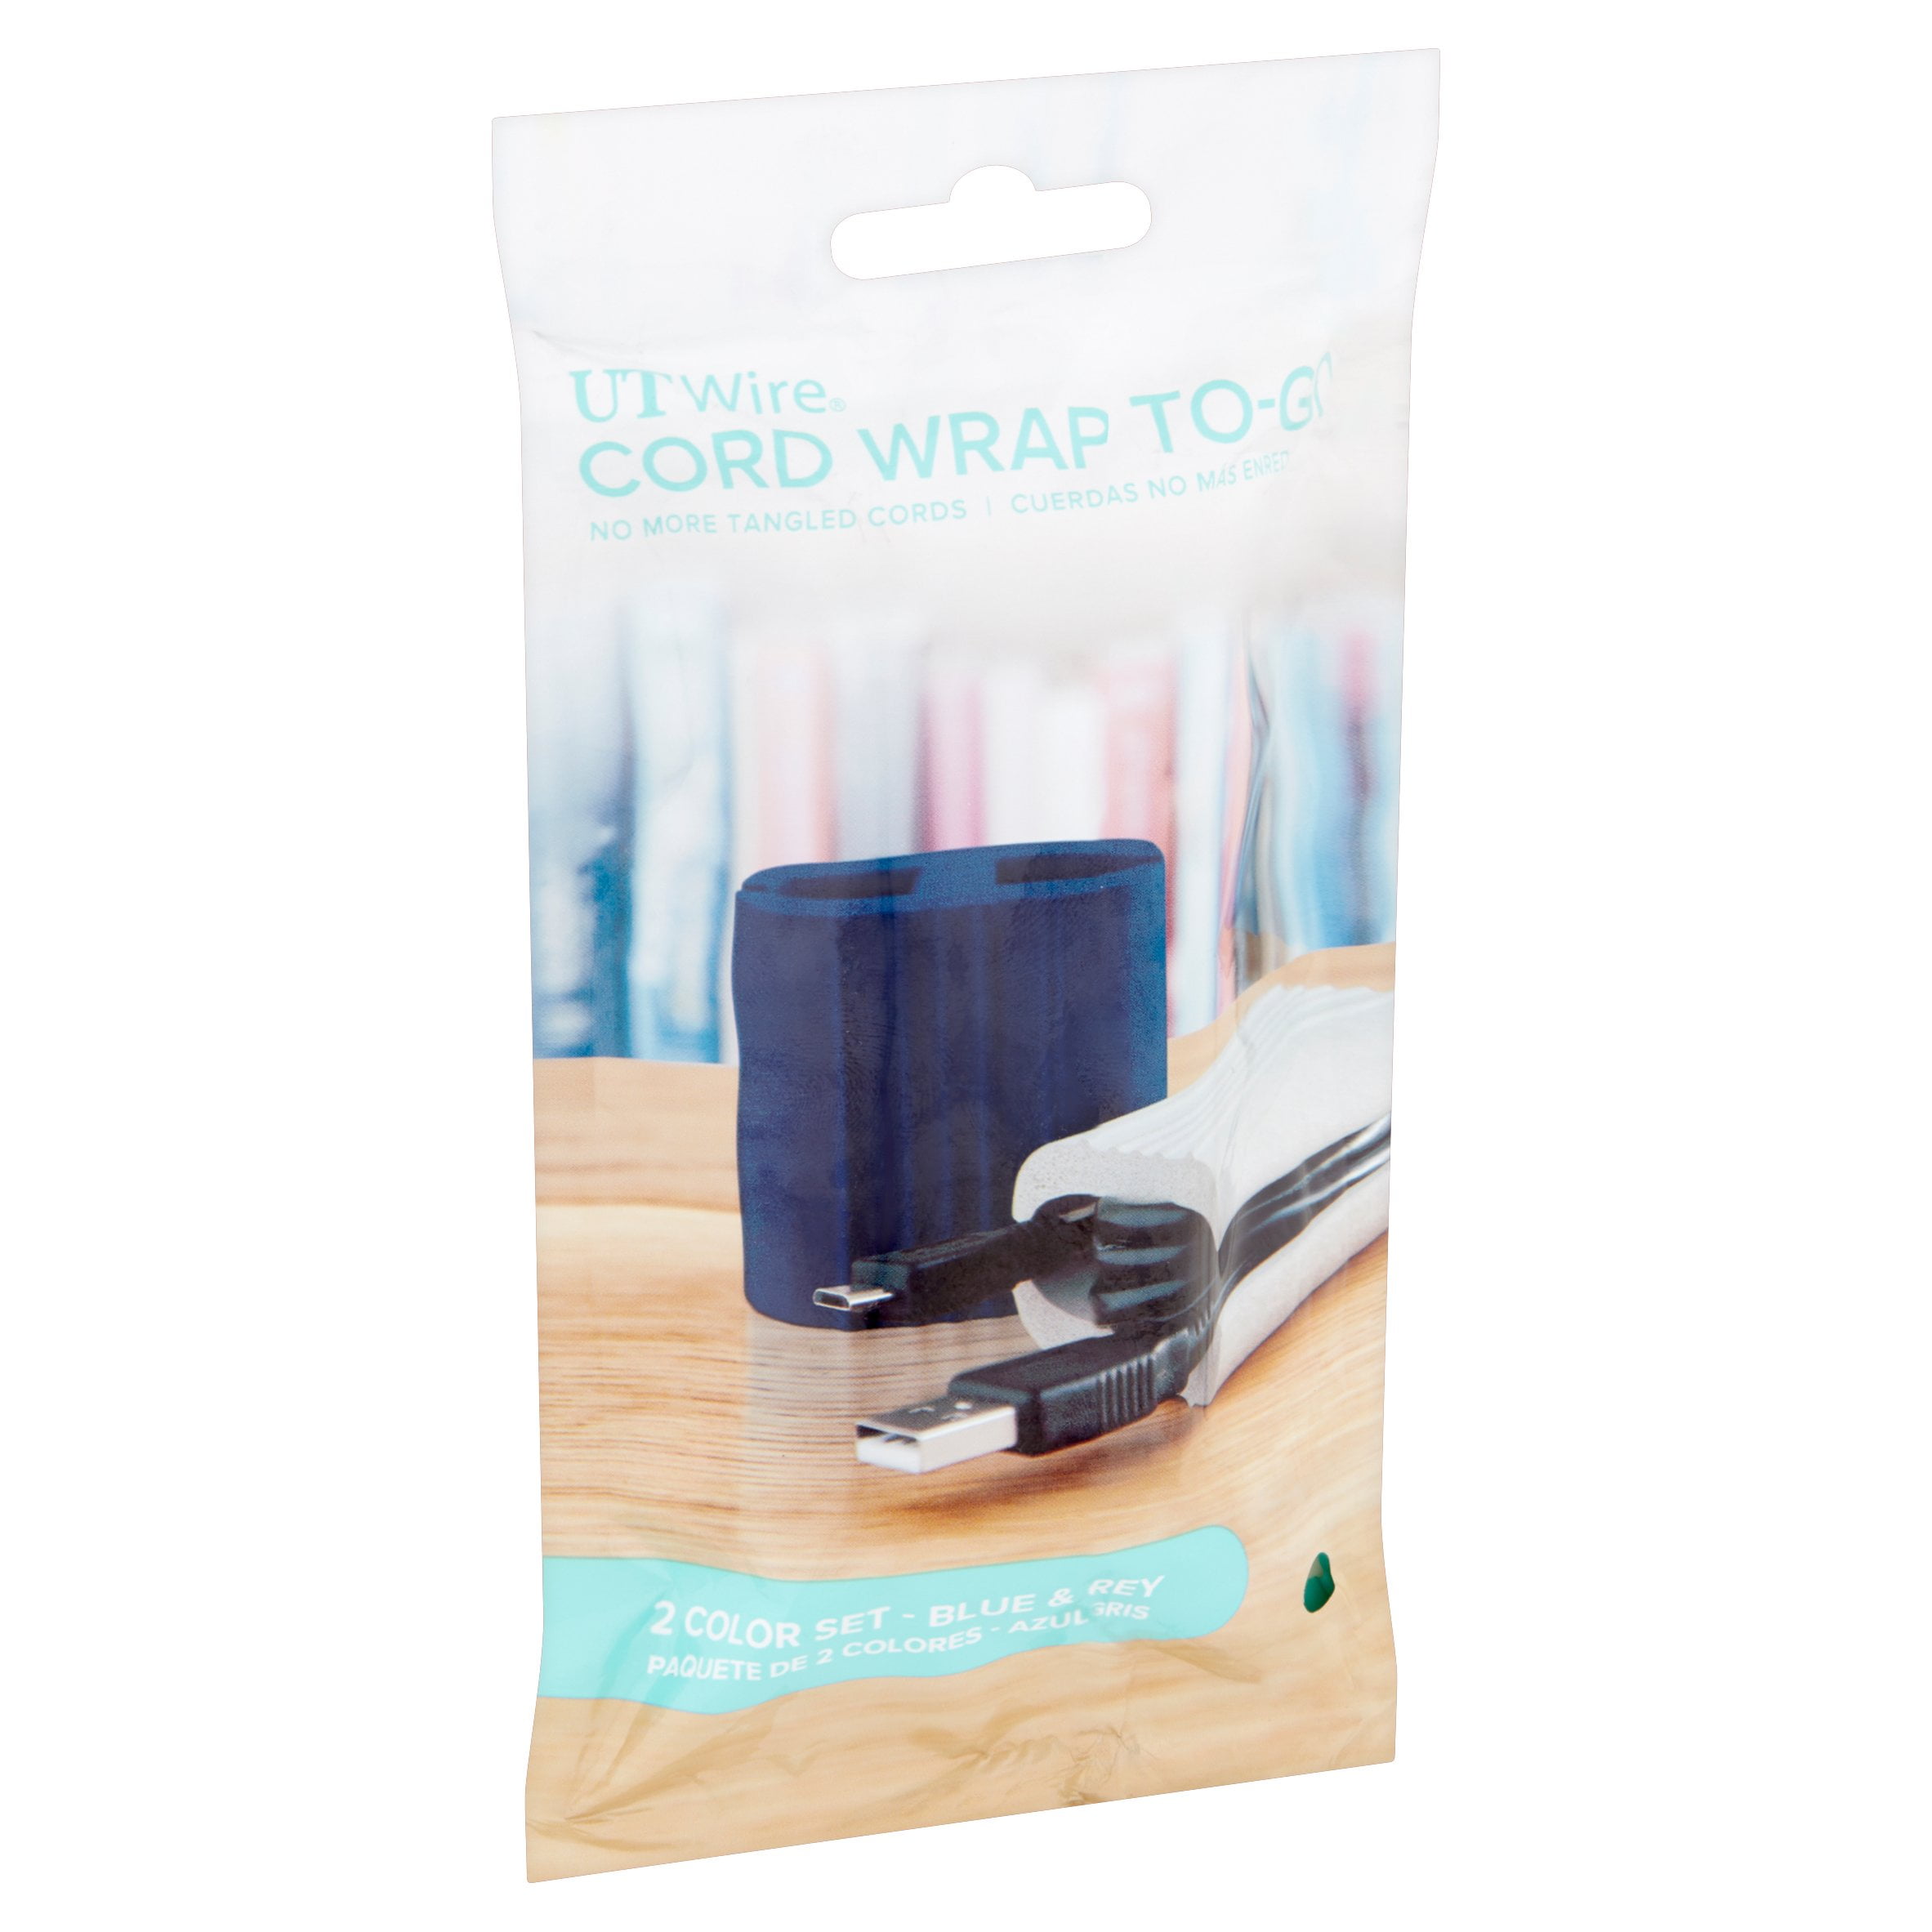 Cord Wrap-To-Go – UT WIRE